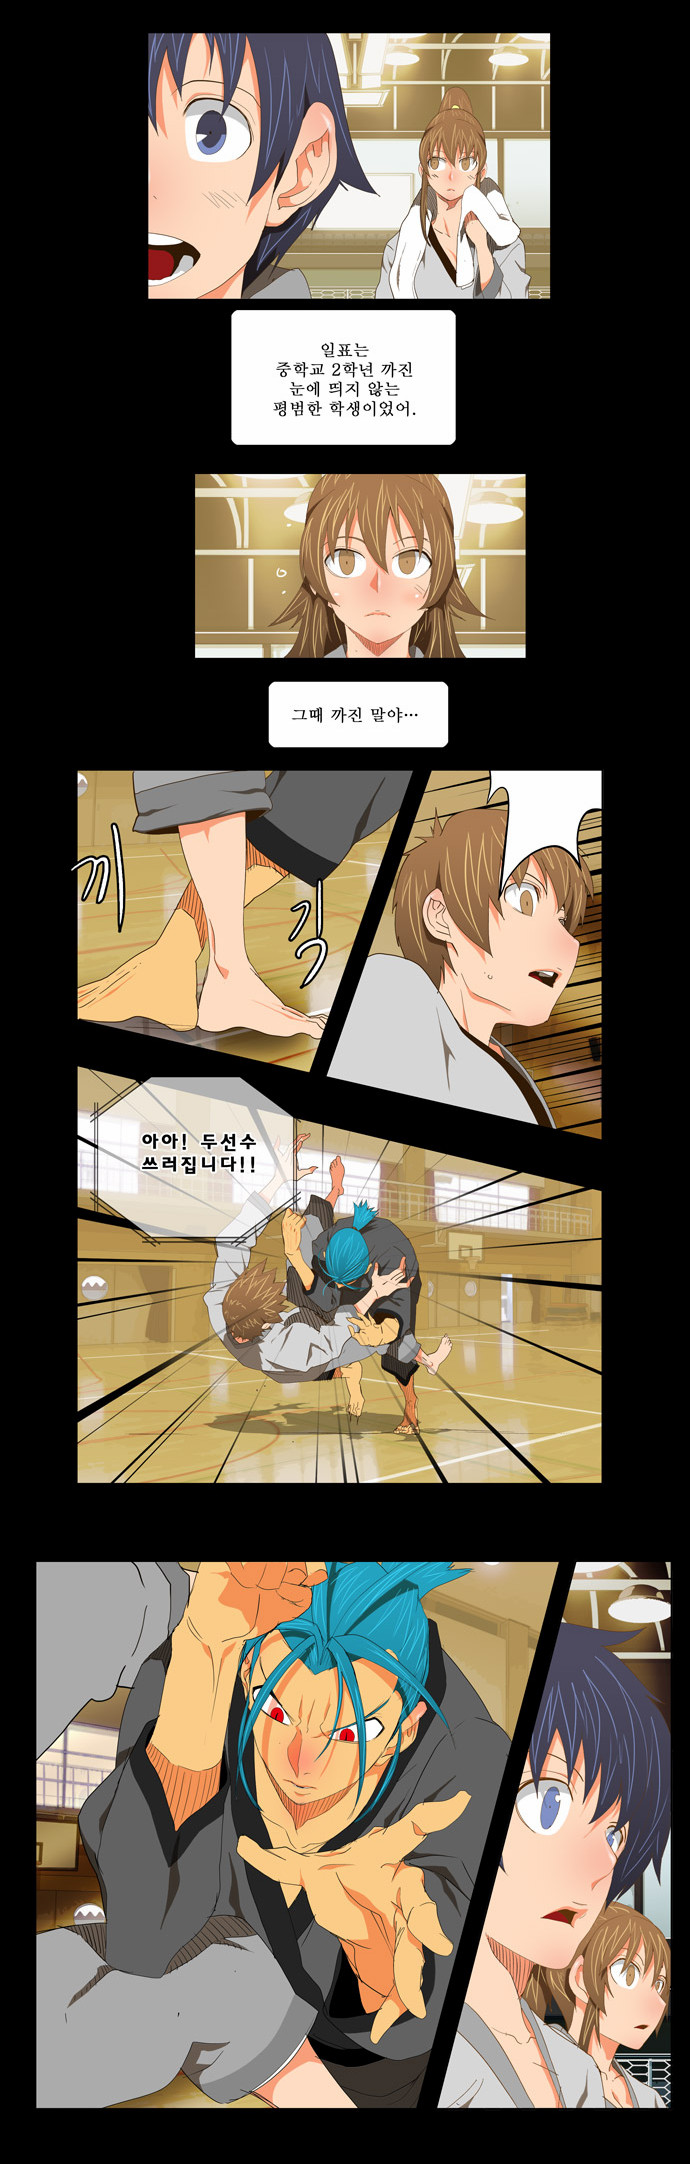 The God of High School - Chapter 94 - Page 2